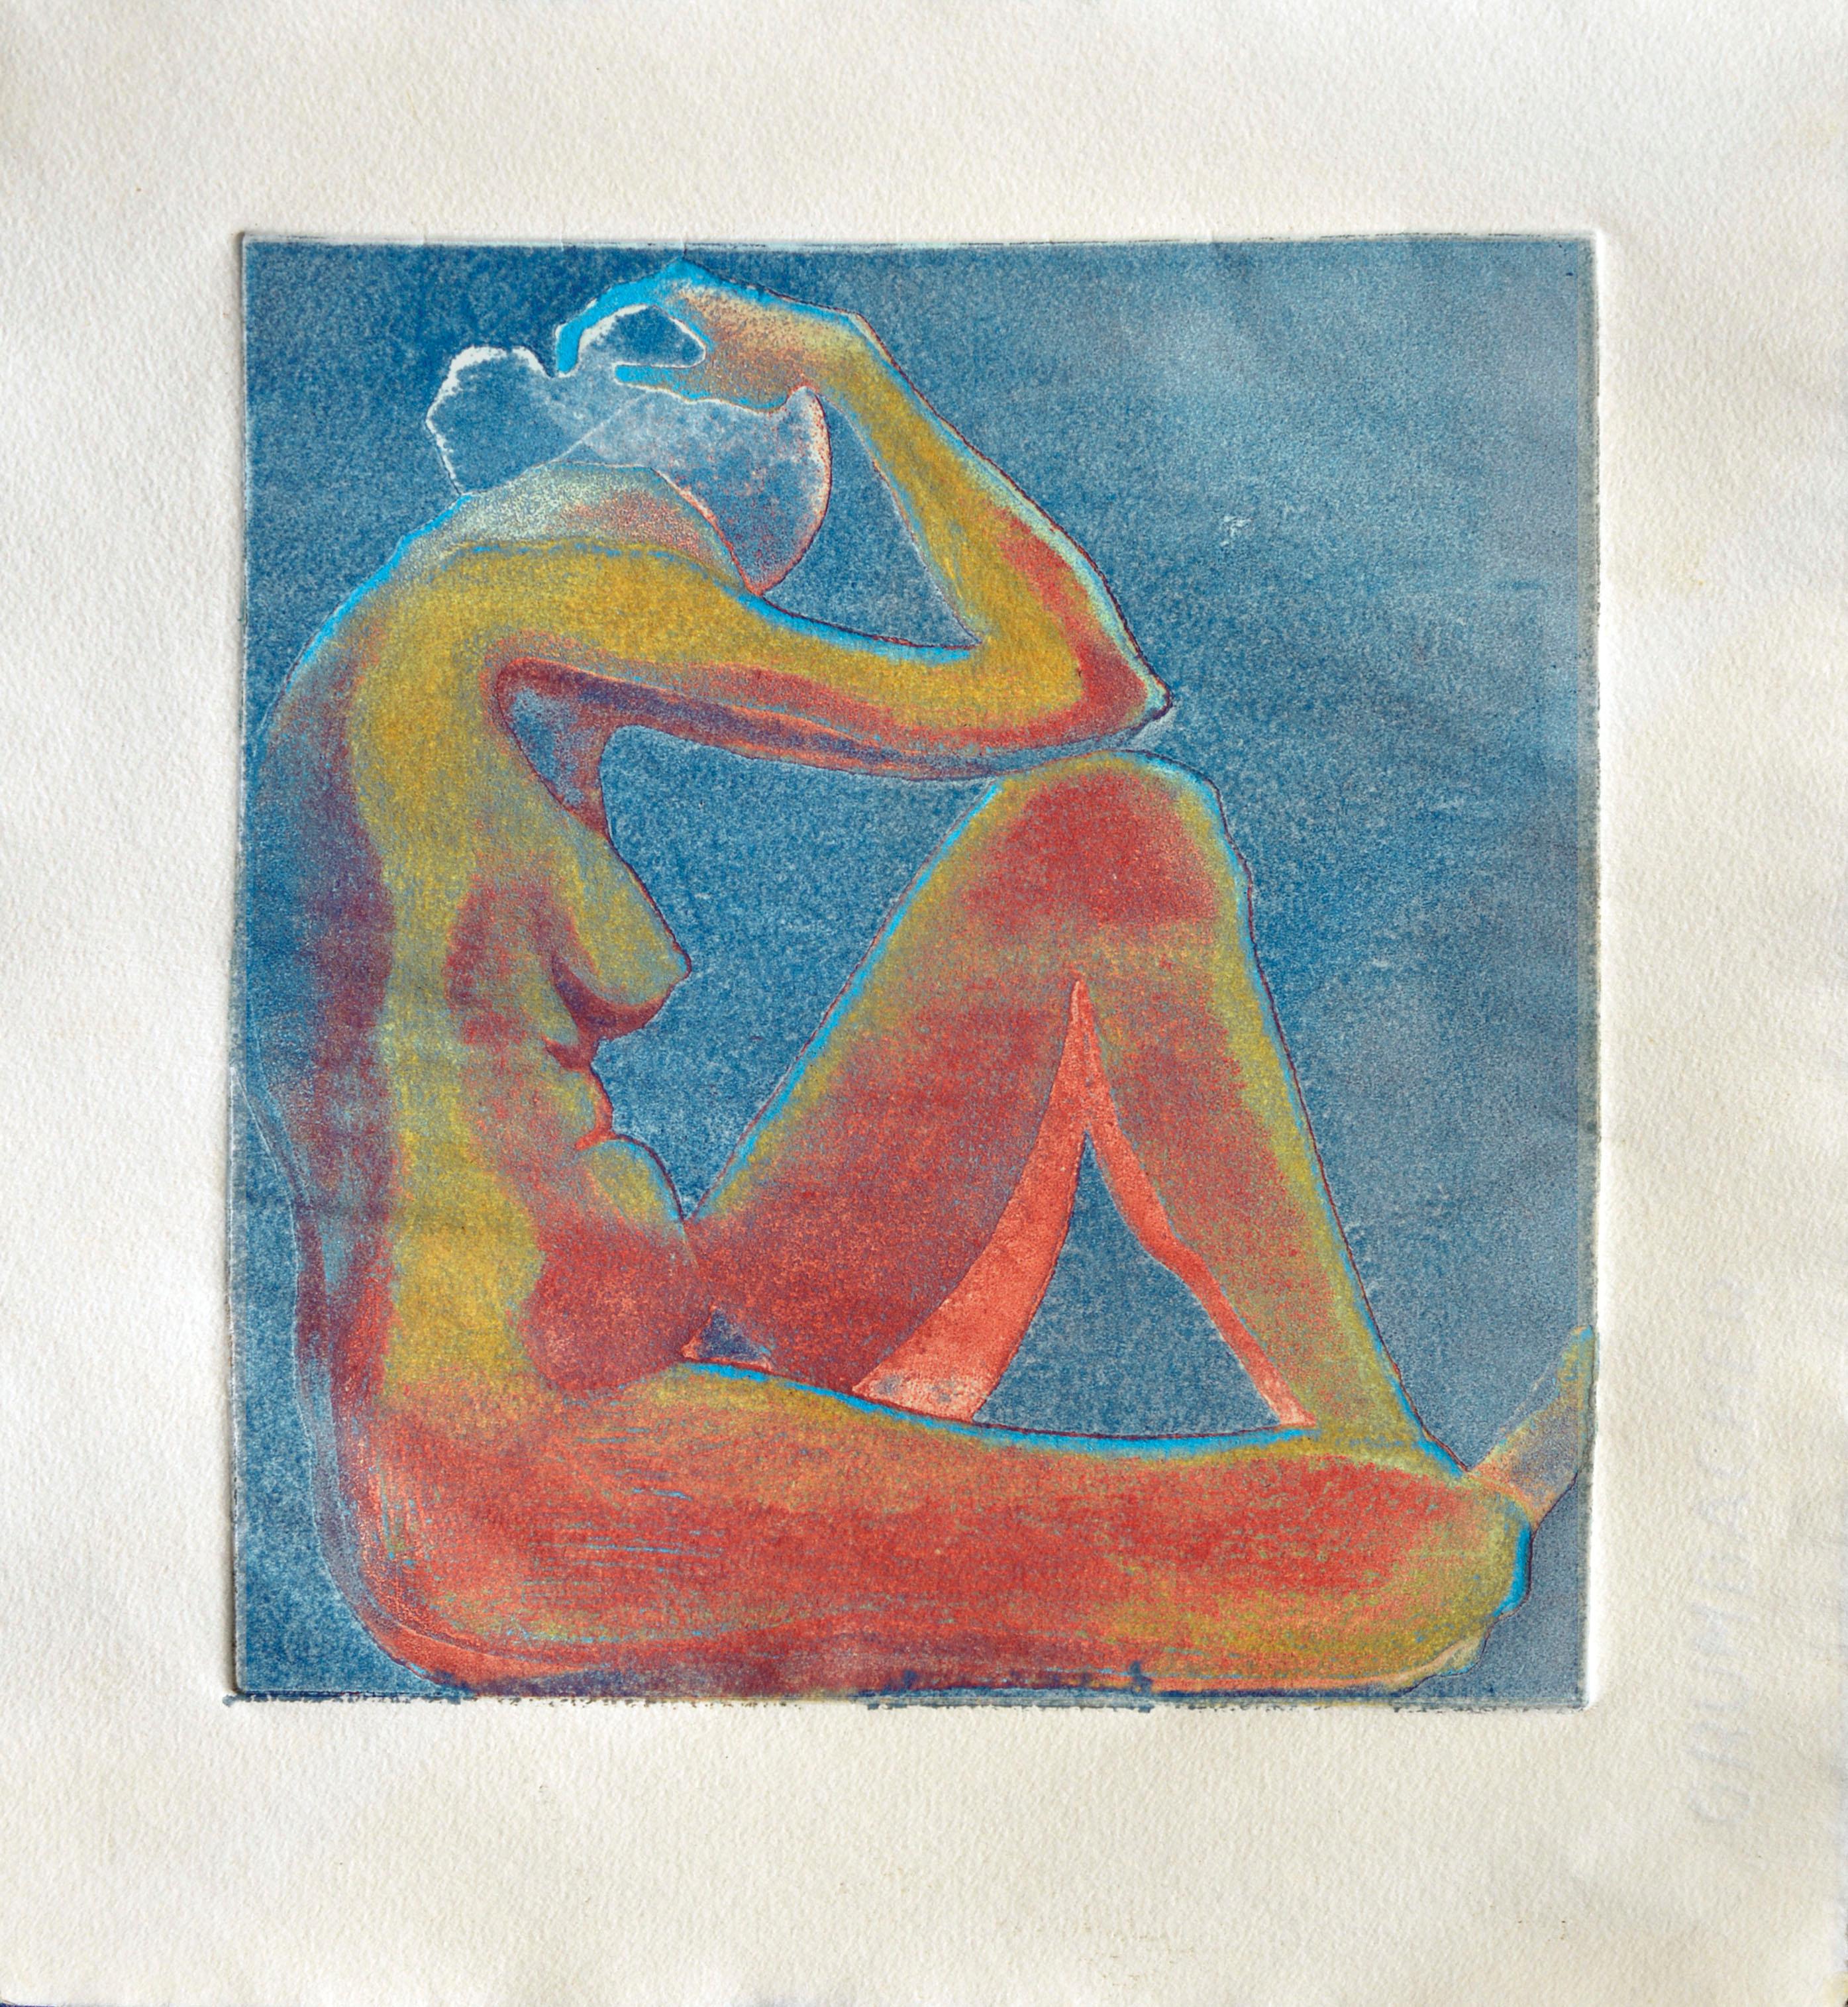 Seated Nude Figure in Red & Blue